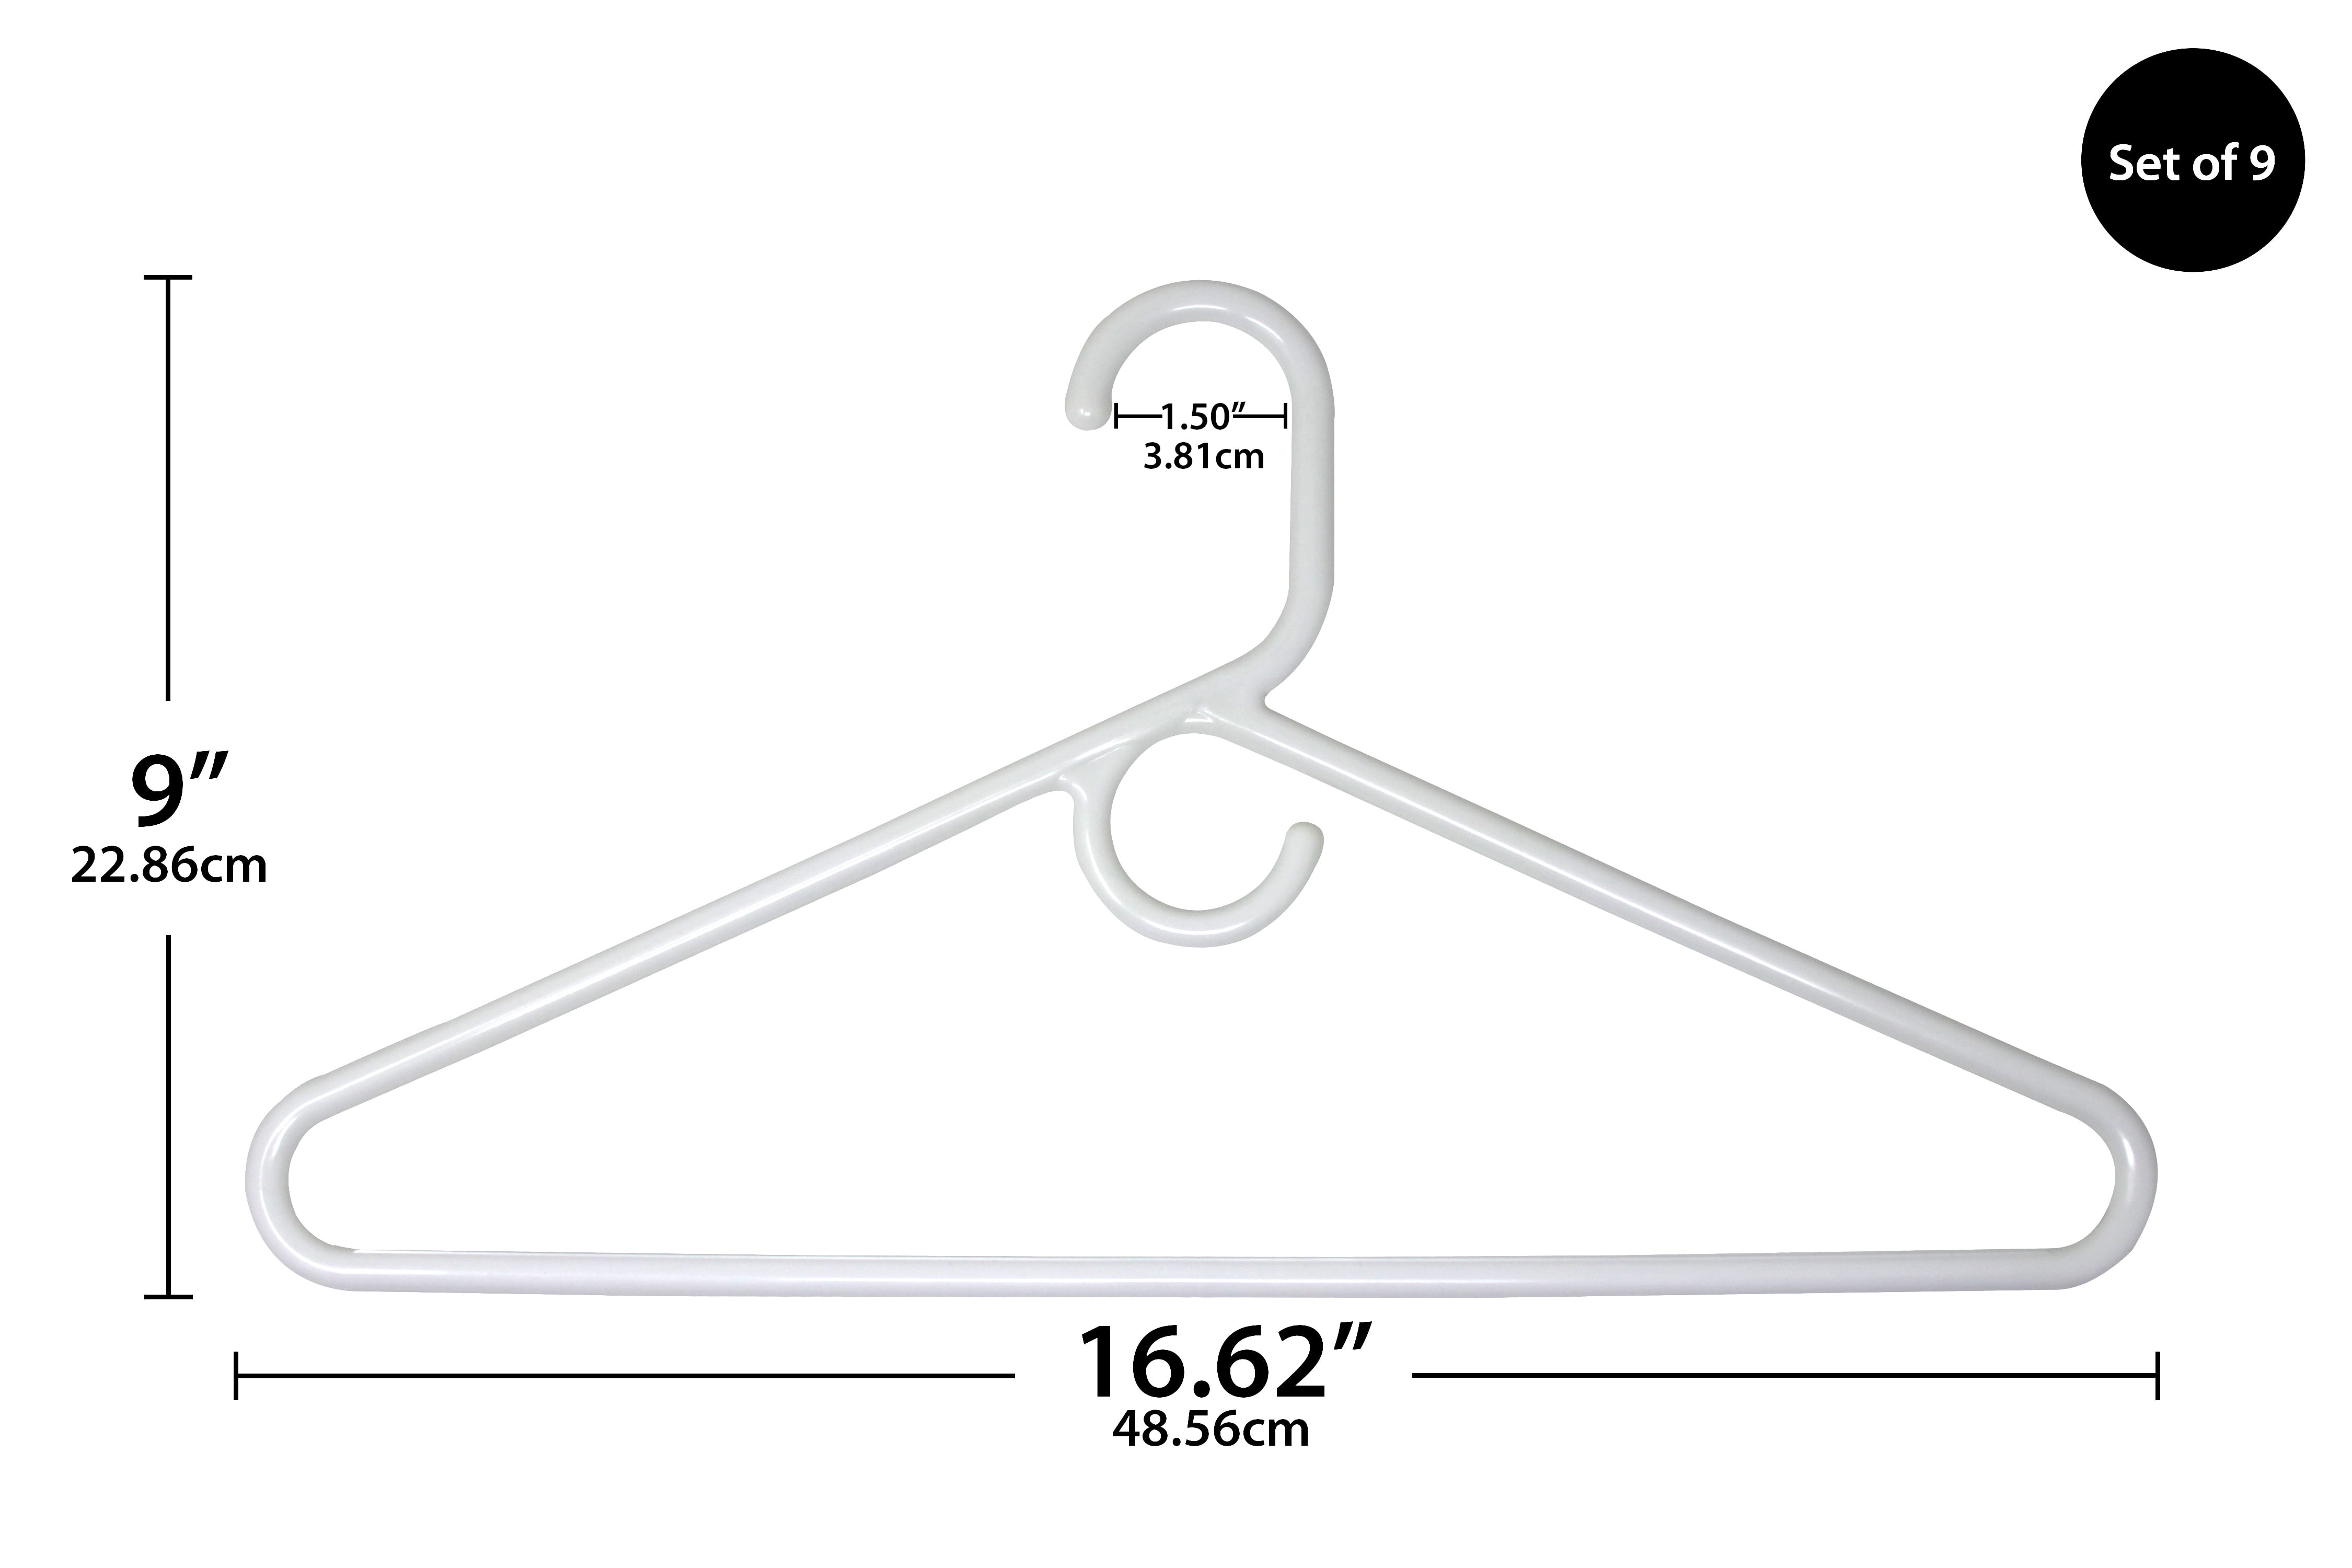 Bridal Heavy-Weight Hold Plastic Hangers - 17 Length/ 4 1/2 Neck -  100/Box - WAWAK Sewing Supplies